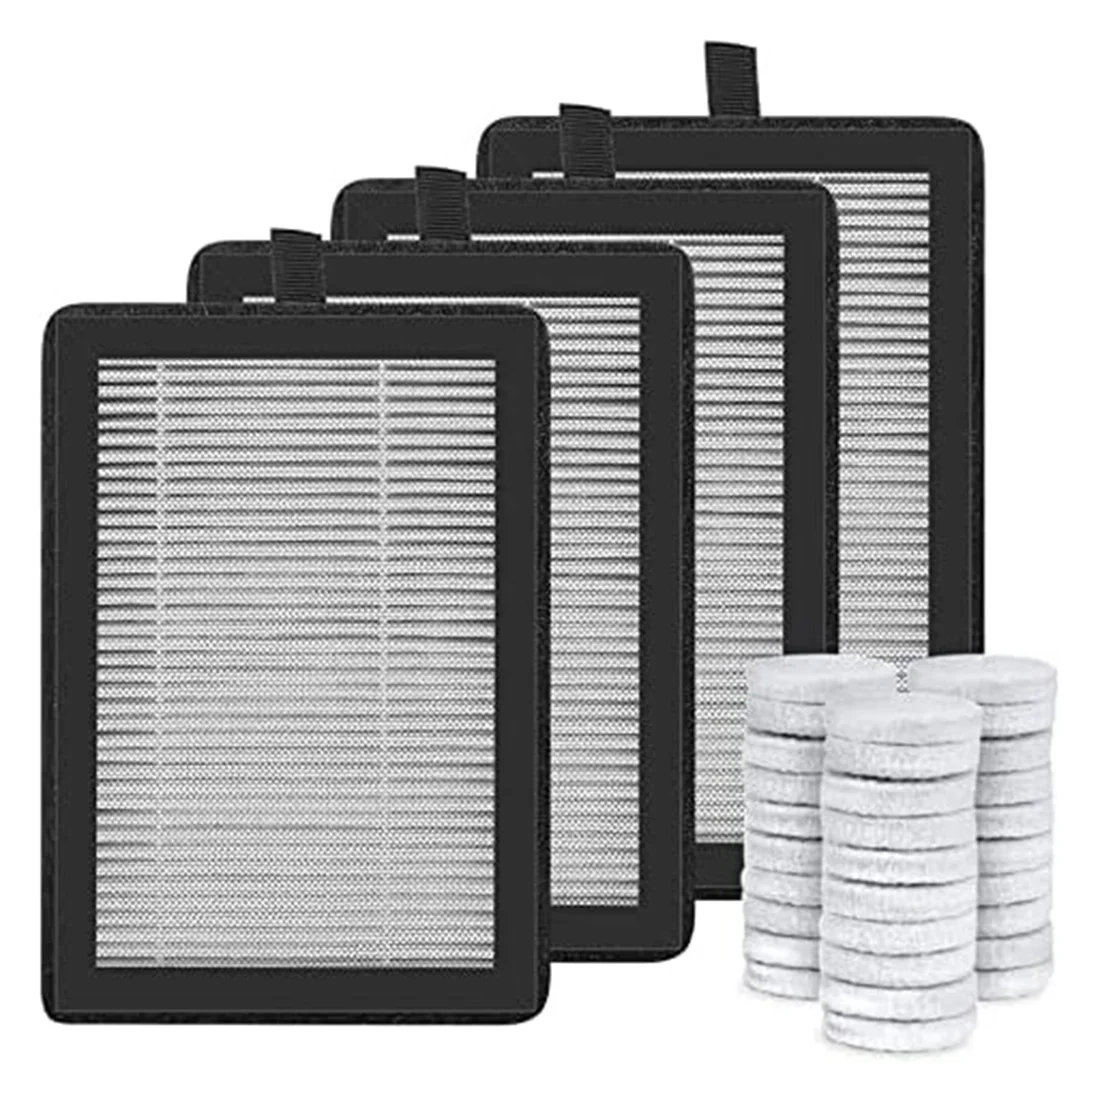 

True HEPA Replacement Filter for LEVOIT LV-H128 / PUURVSAS (HM669A)/ROVACS (RV60) Air Purifier,3-Stage Filtration System